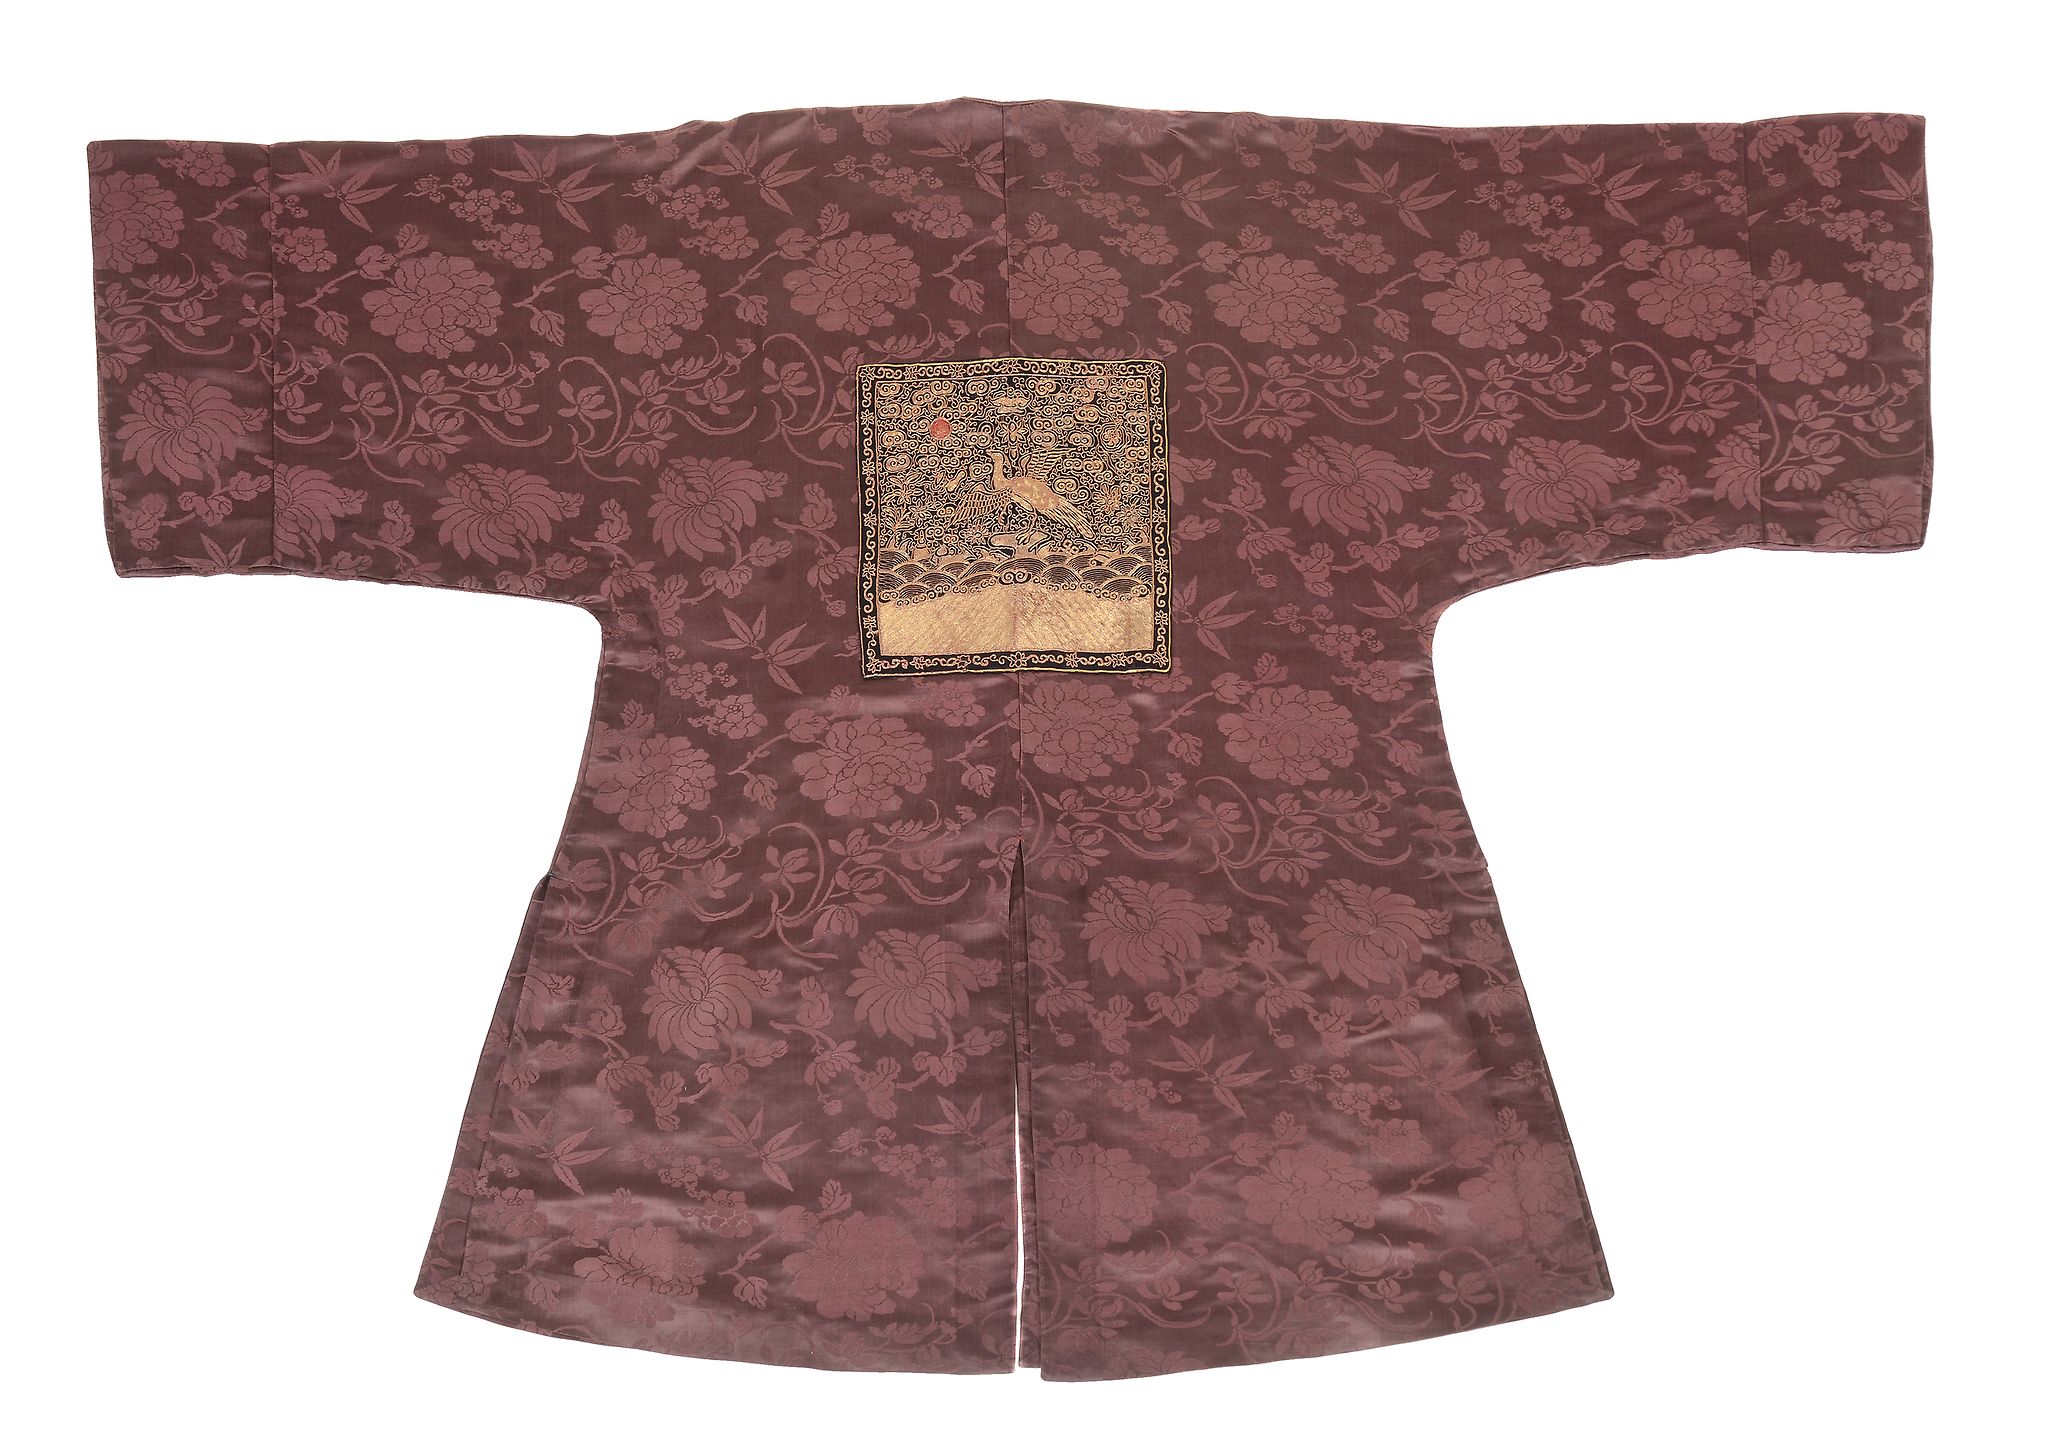 A civil official s burgundy brocade silk surcoat, bufu, 19th century  , finely woven with blooming - Image 2 of 4